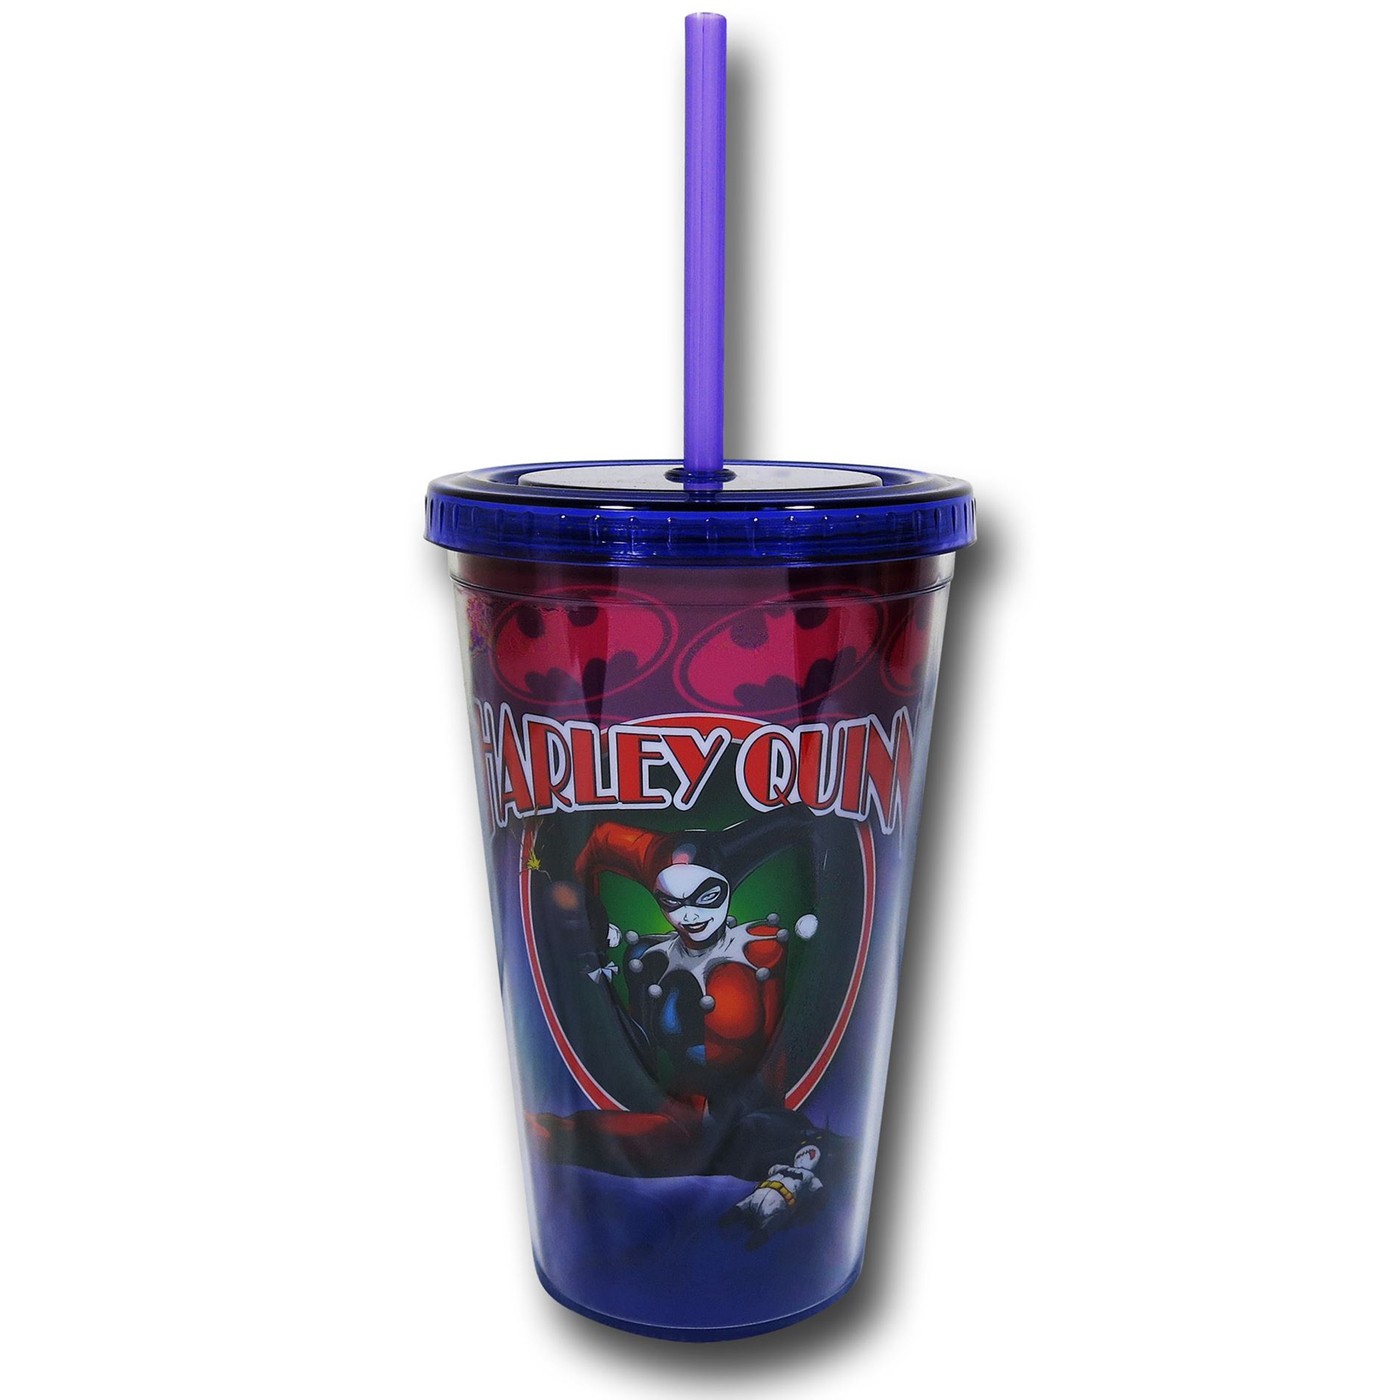 Harley Quinn Lit Fuse Cold Cup w/ Straw